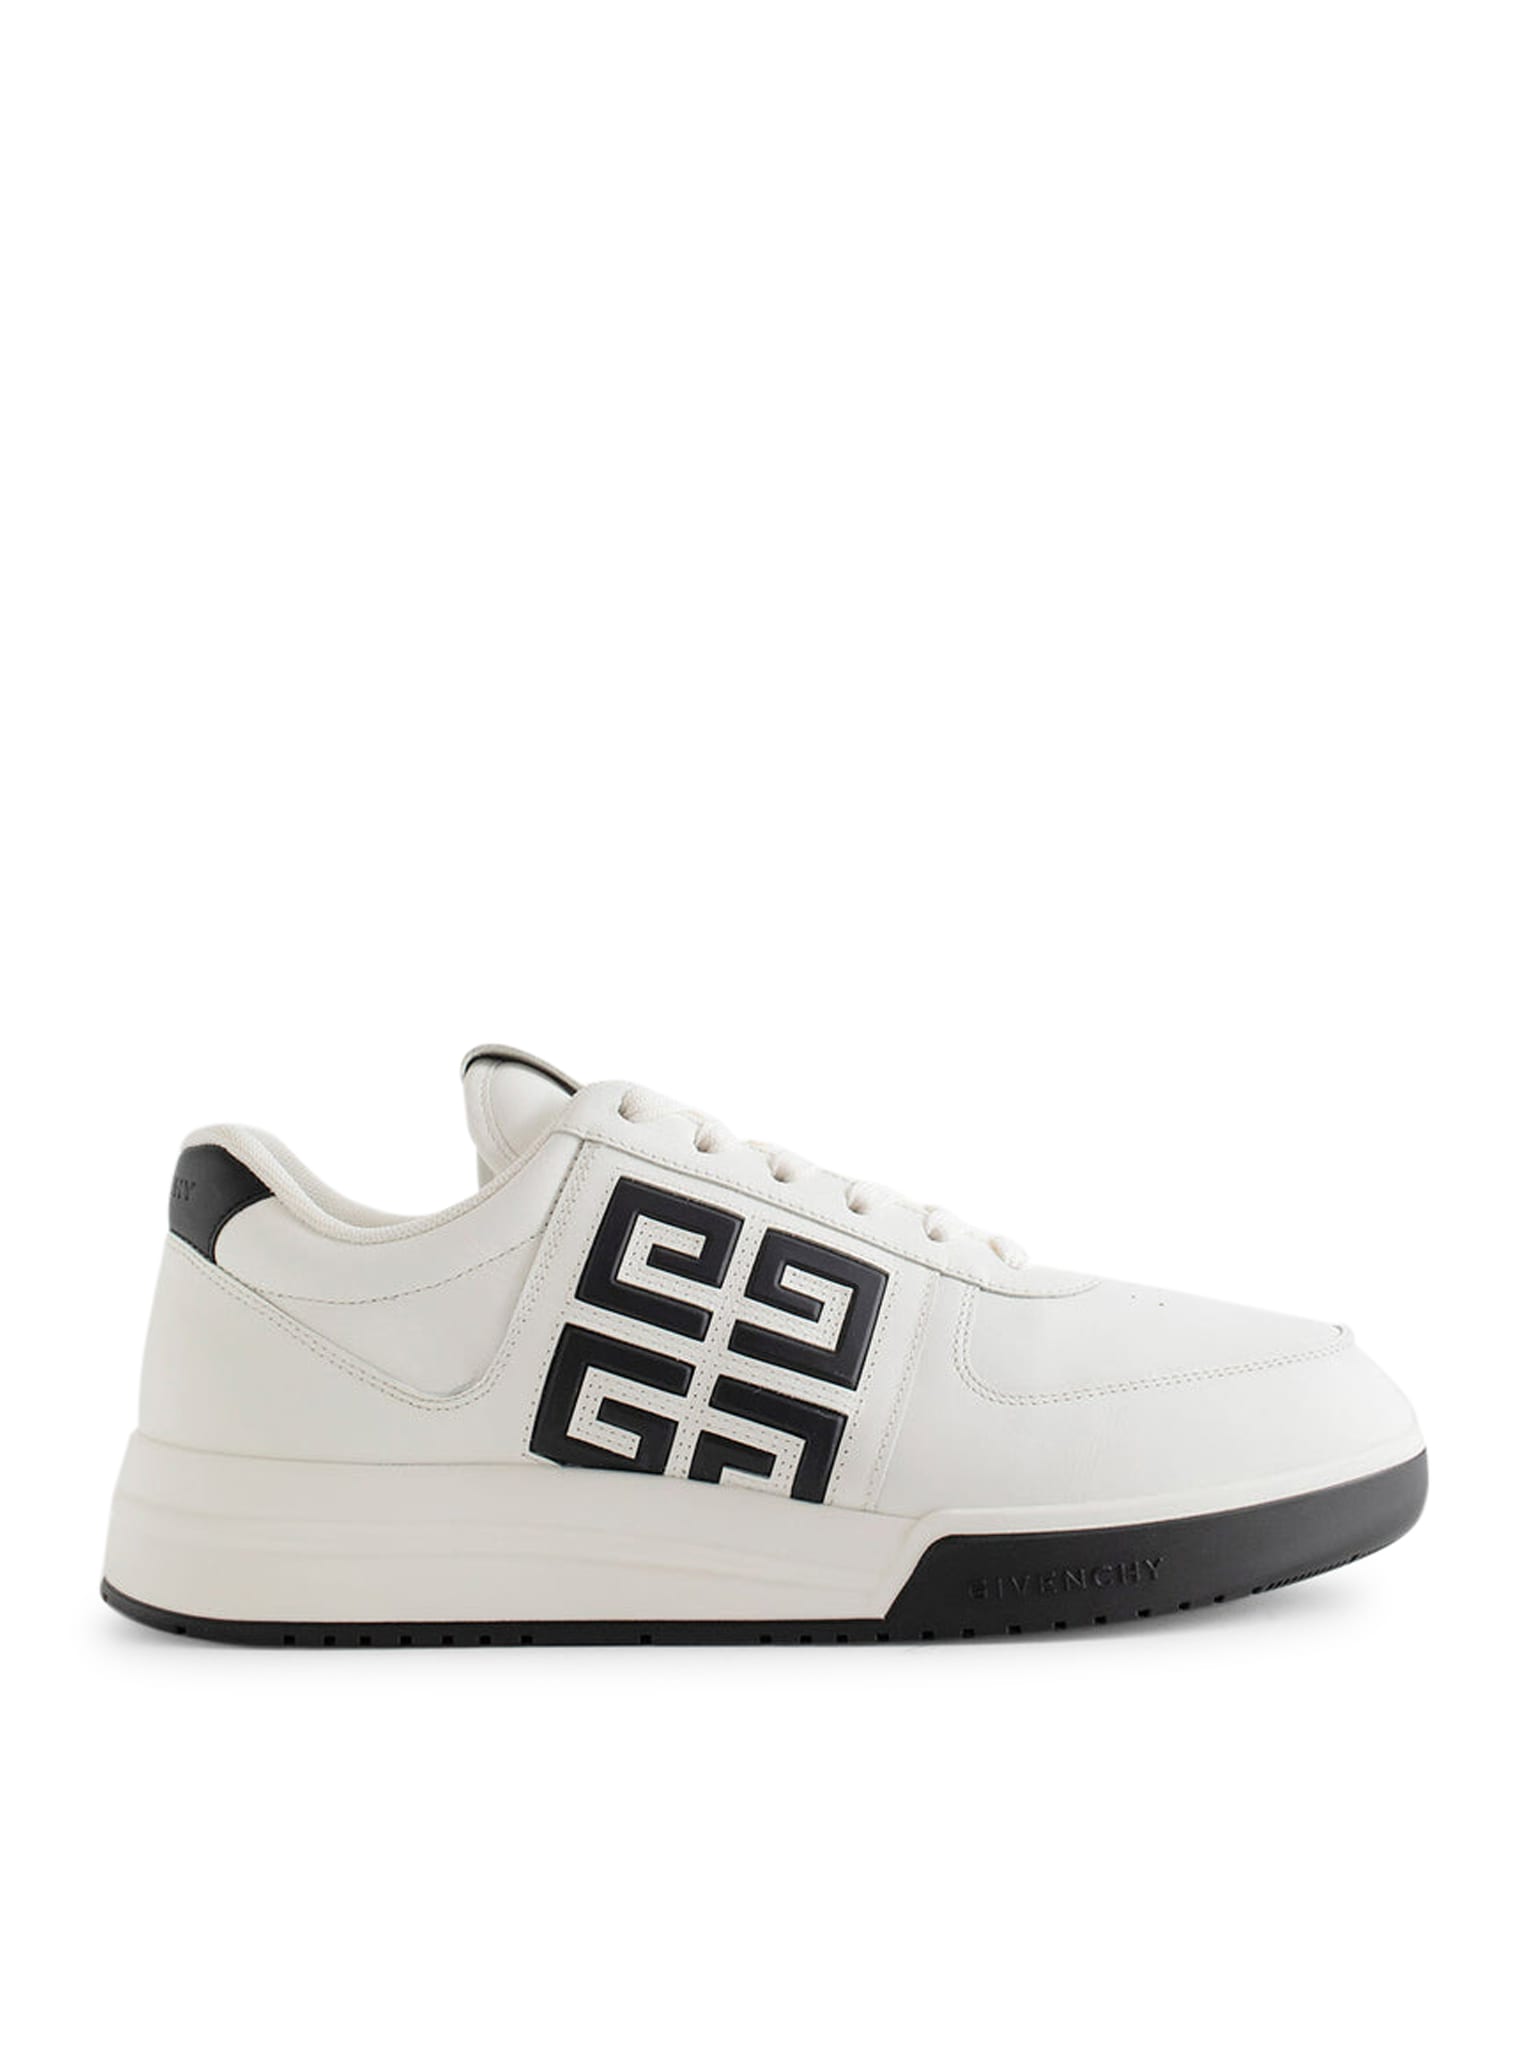 Givenchy G4 Low-top Sneakers In Black White